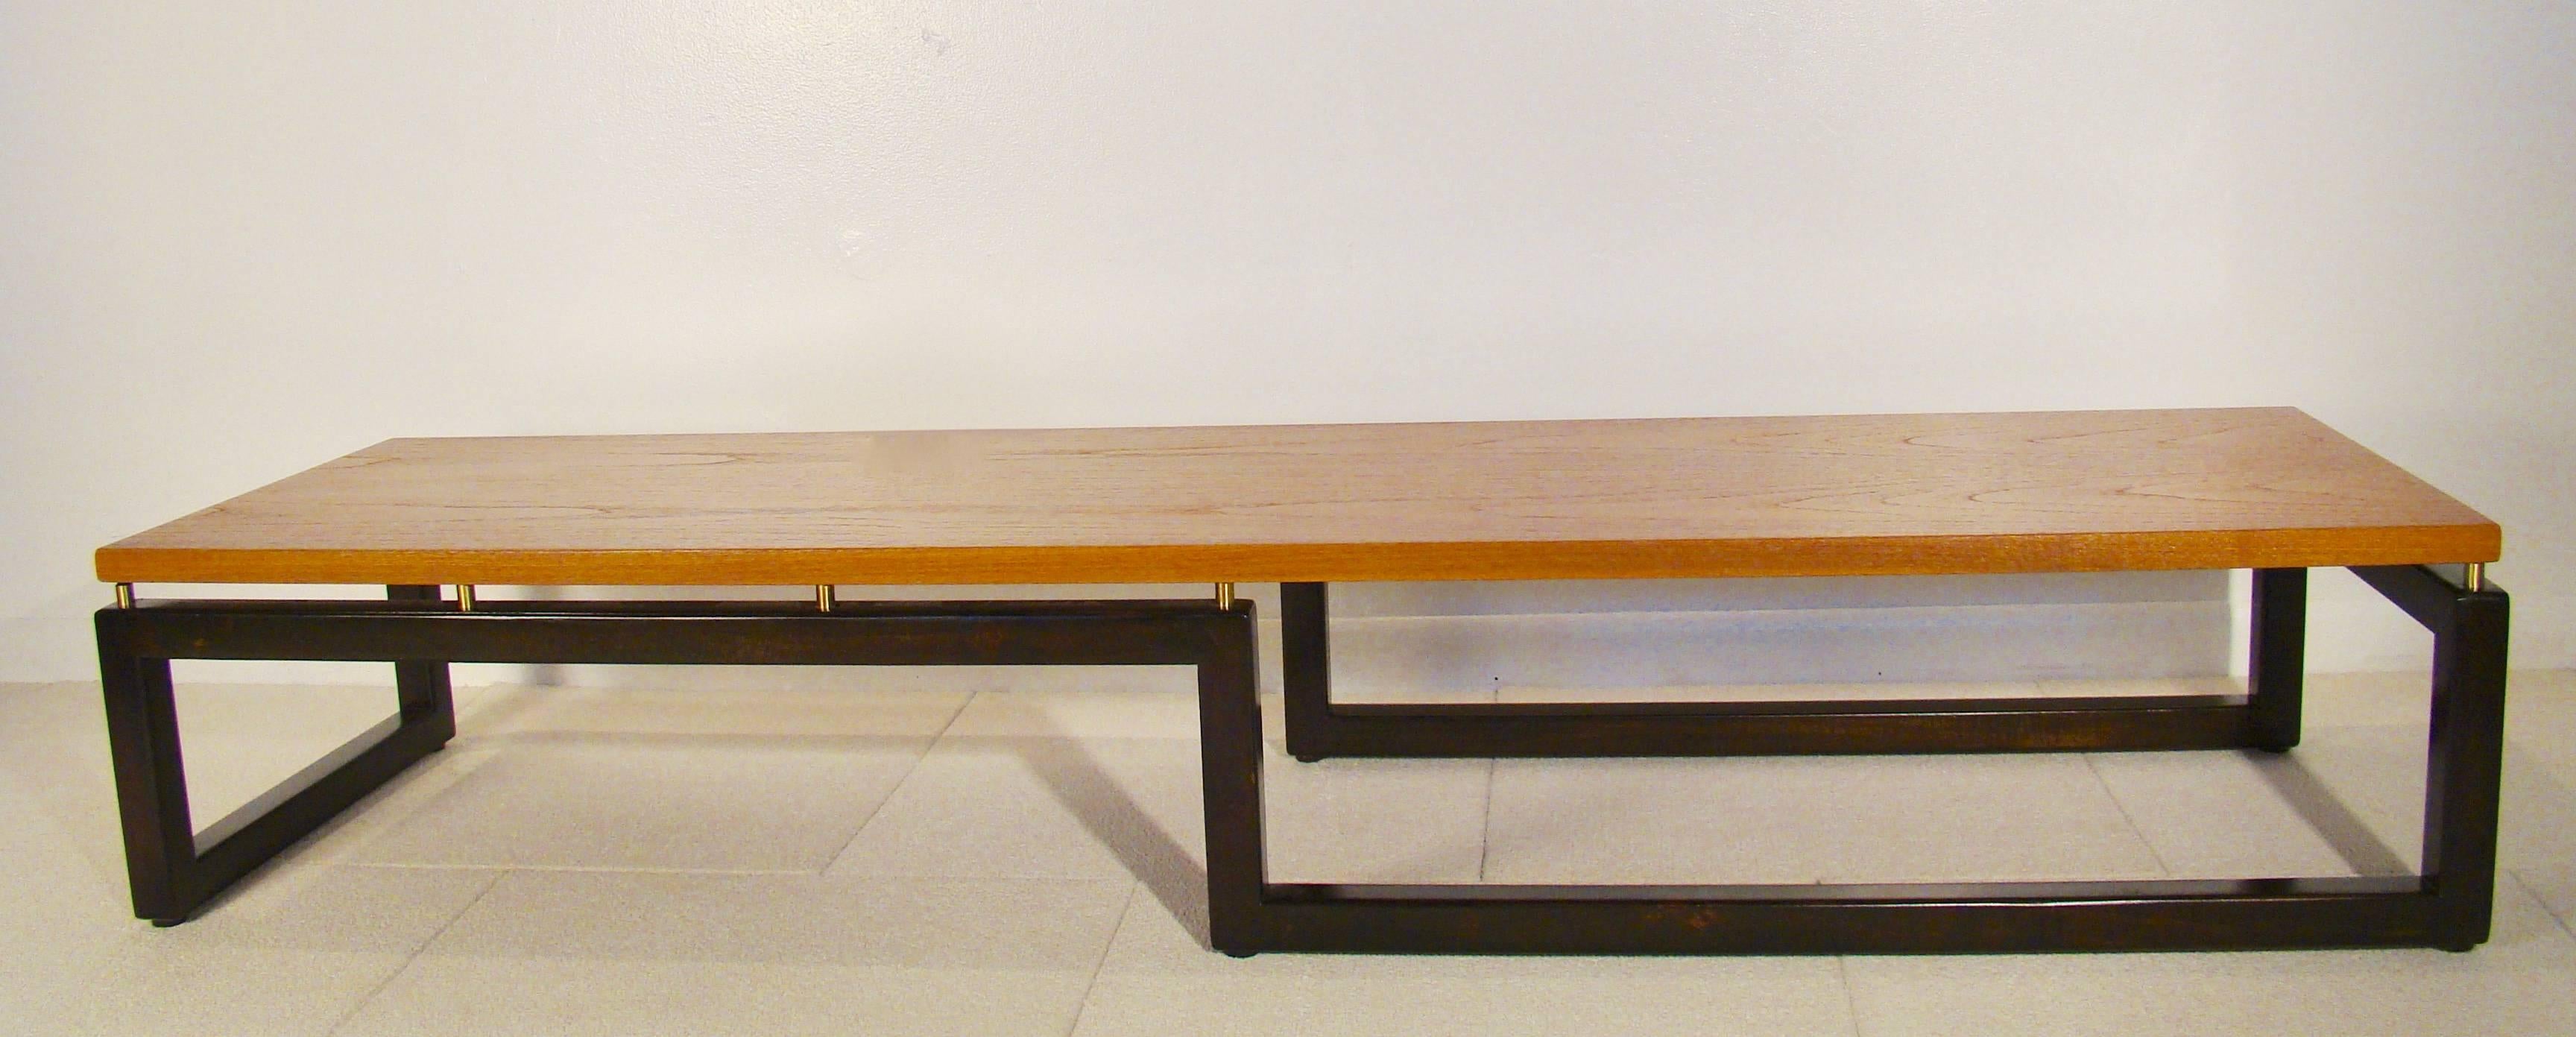 American Michael Taylor for Baker Furniture Long and Low Bench or Coffee Table